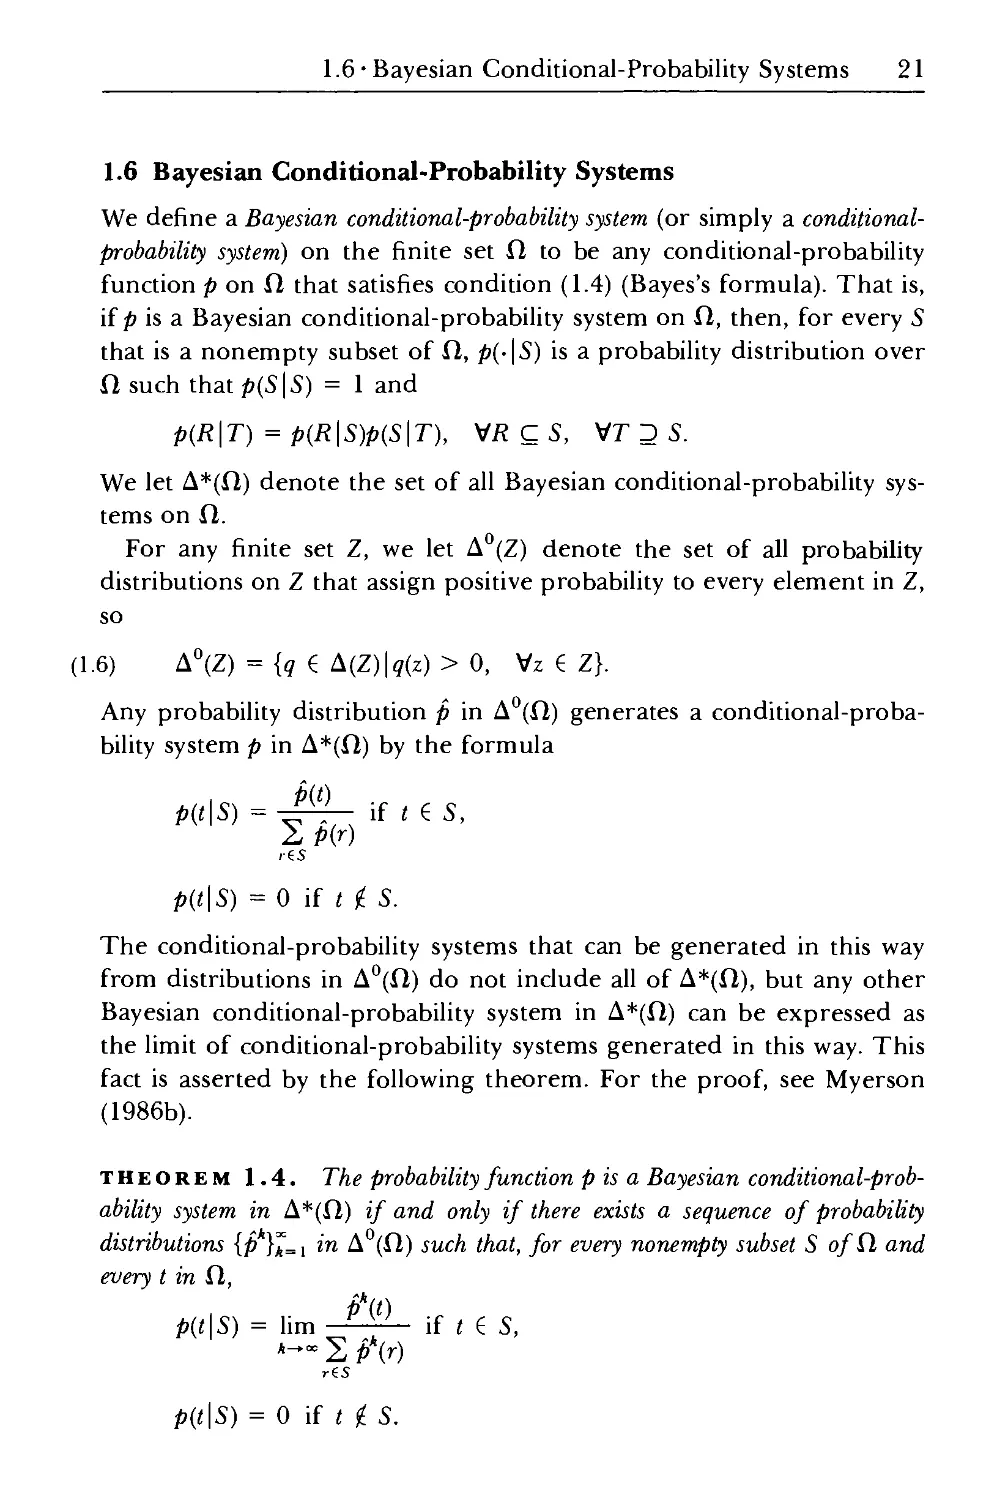 1.6 Bayesian Conditional-Probability Systems